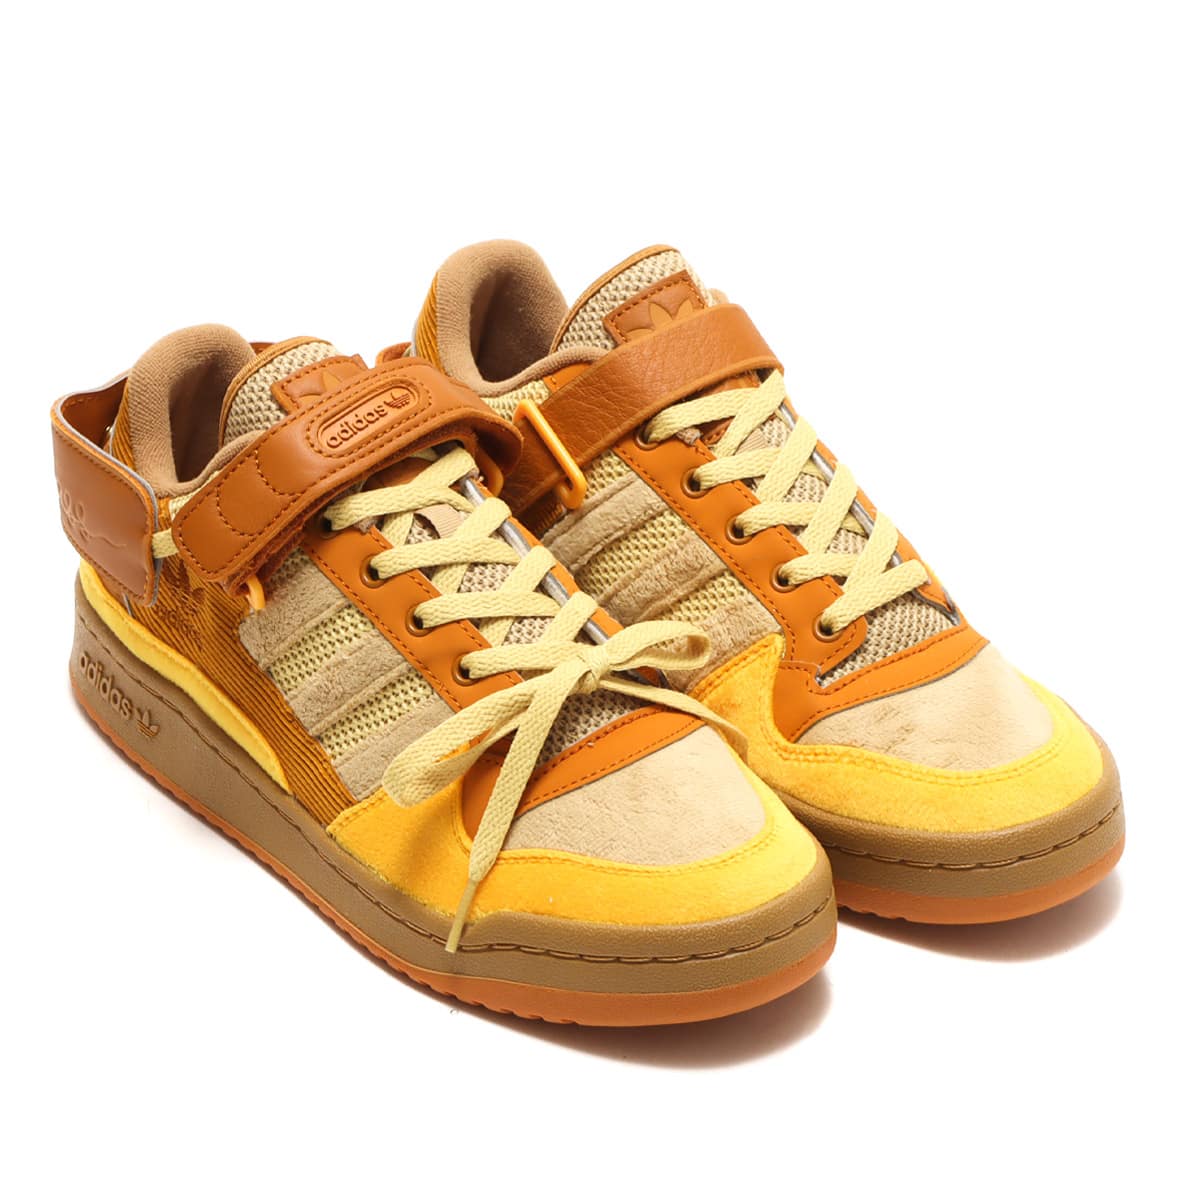 m&m's × adidas Forum Low "Yellow/Brown